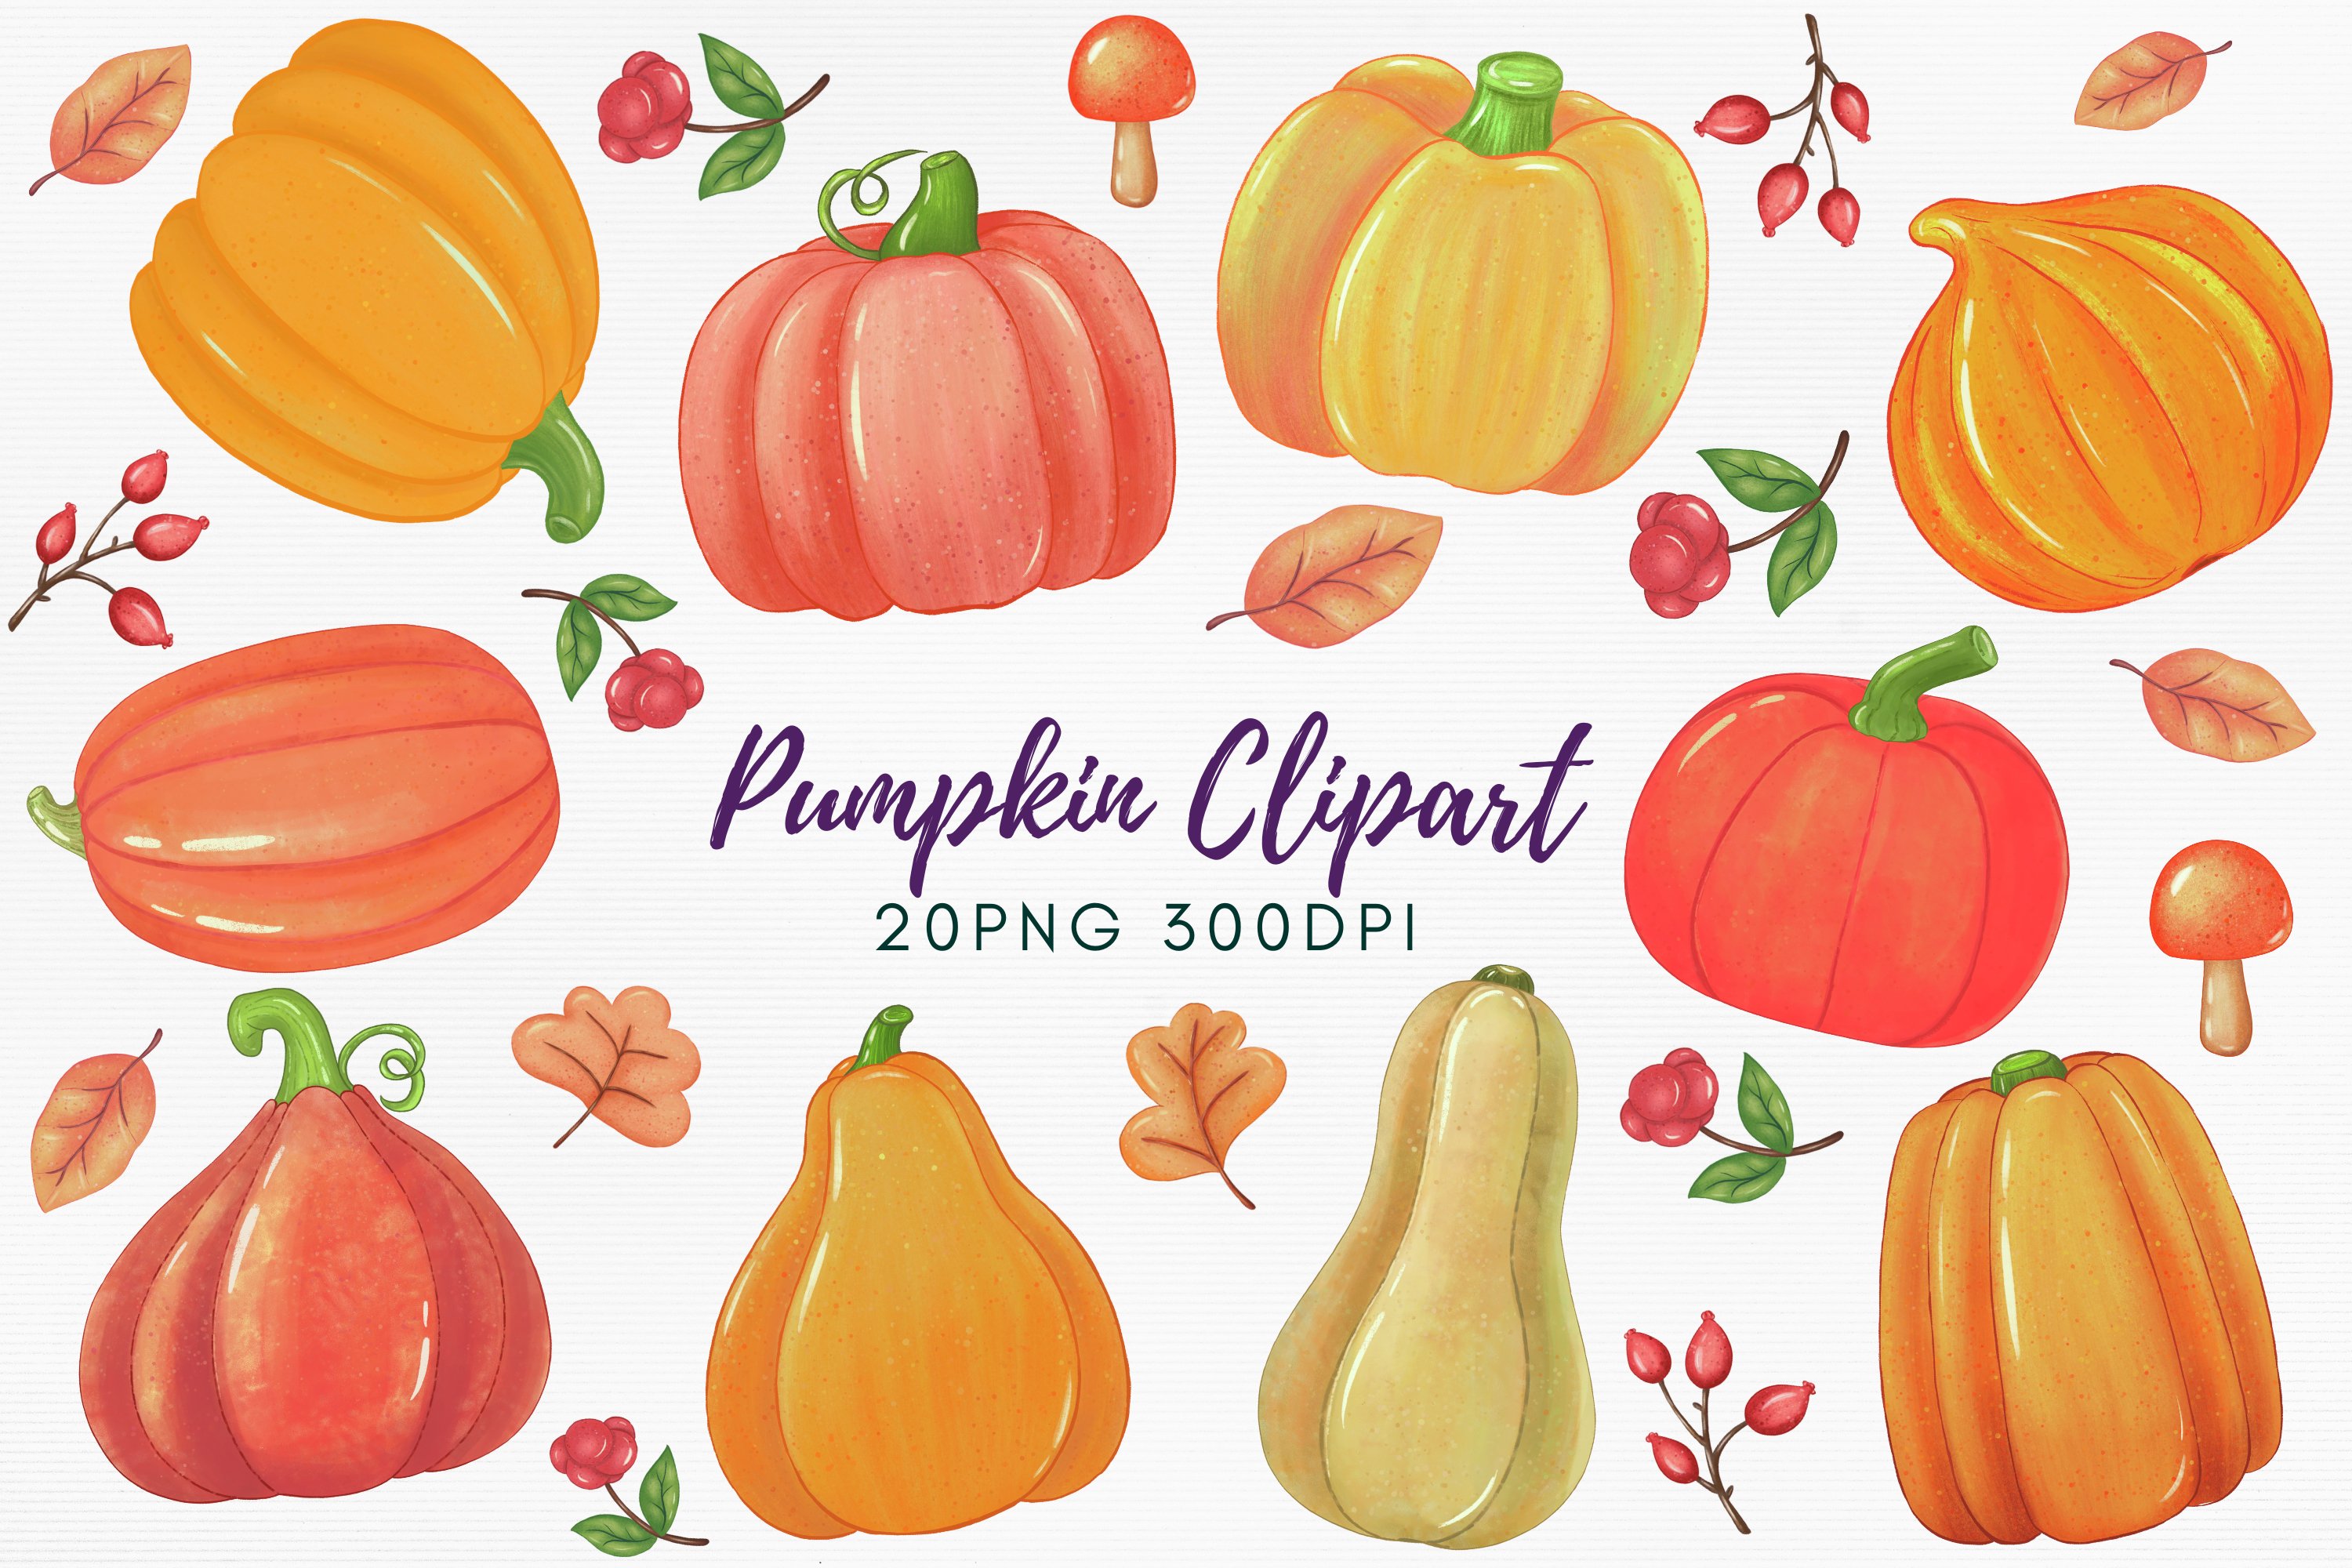 Purple lettering "Pumpkin Clipart" and different illustrations of pumpkin on a gray background.